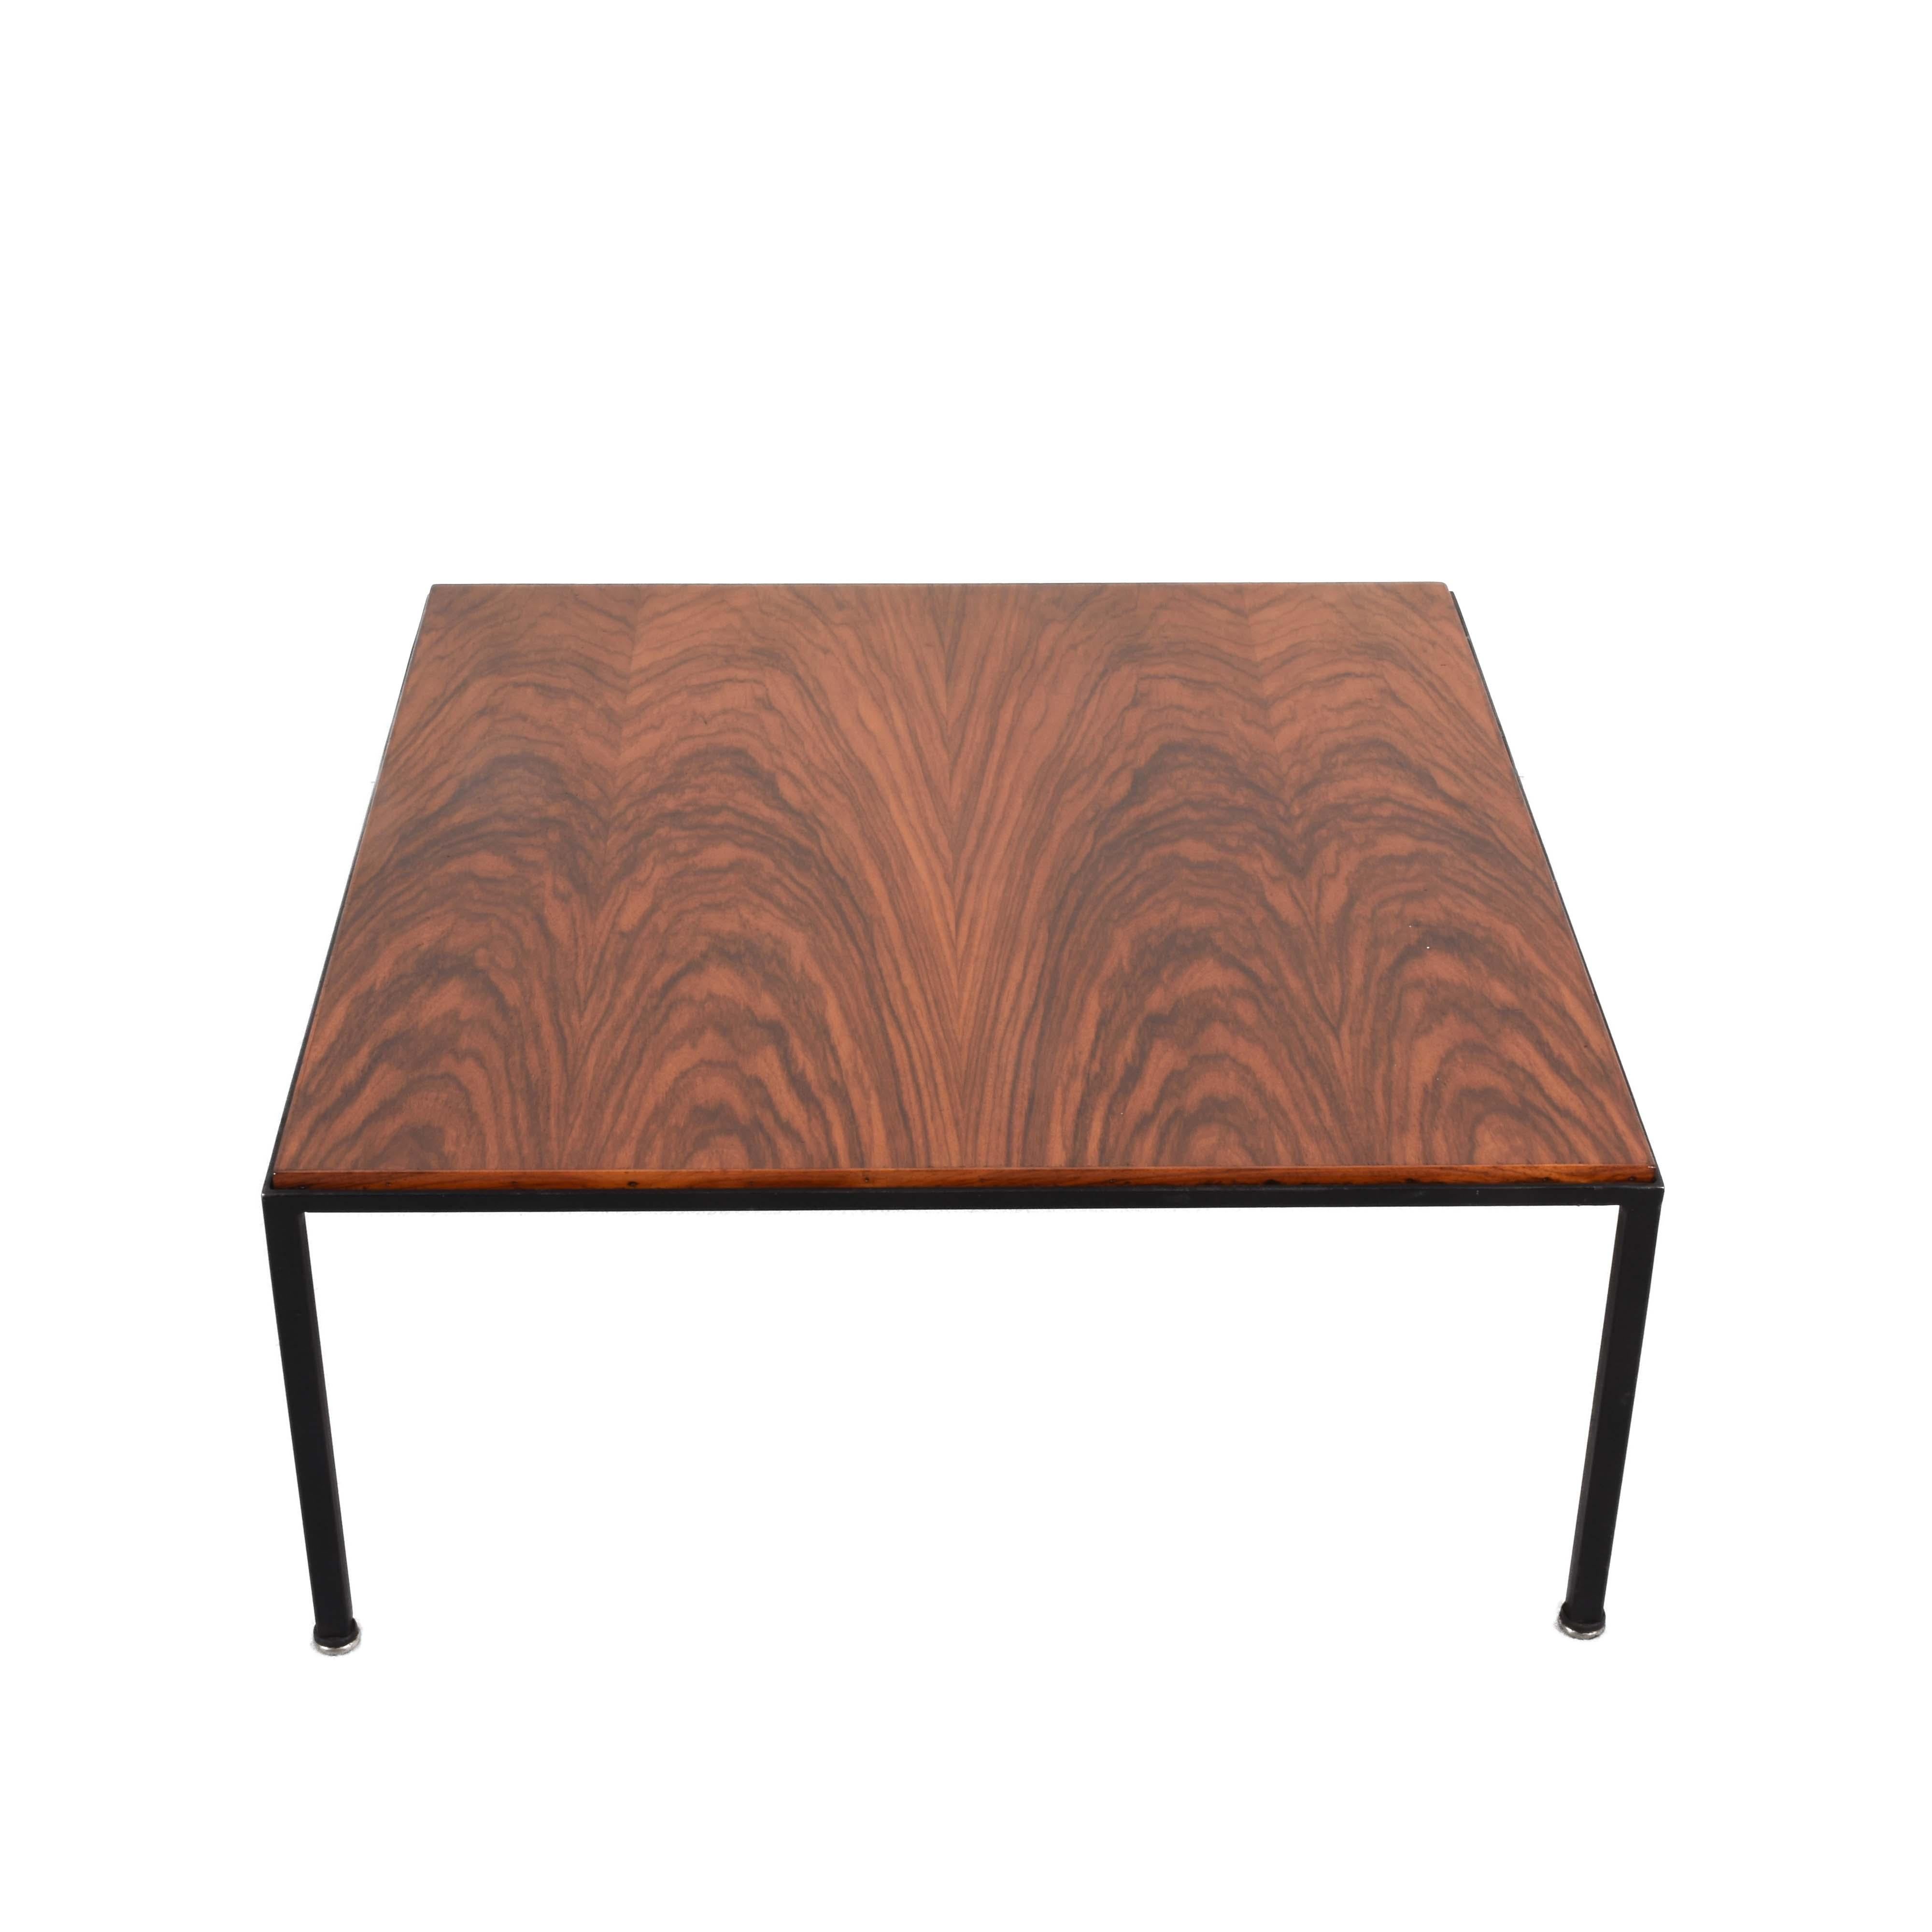 Enameled Italian Design Midcentury Wood and Iron Square Coffee Italian Table, 1960s For Sale